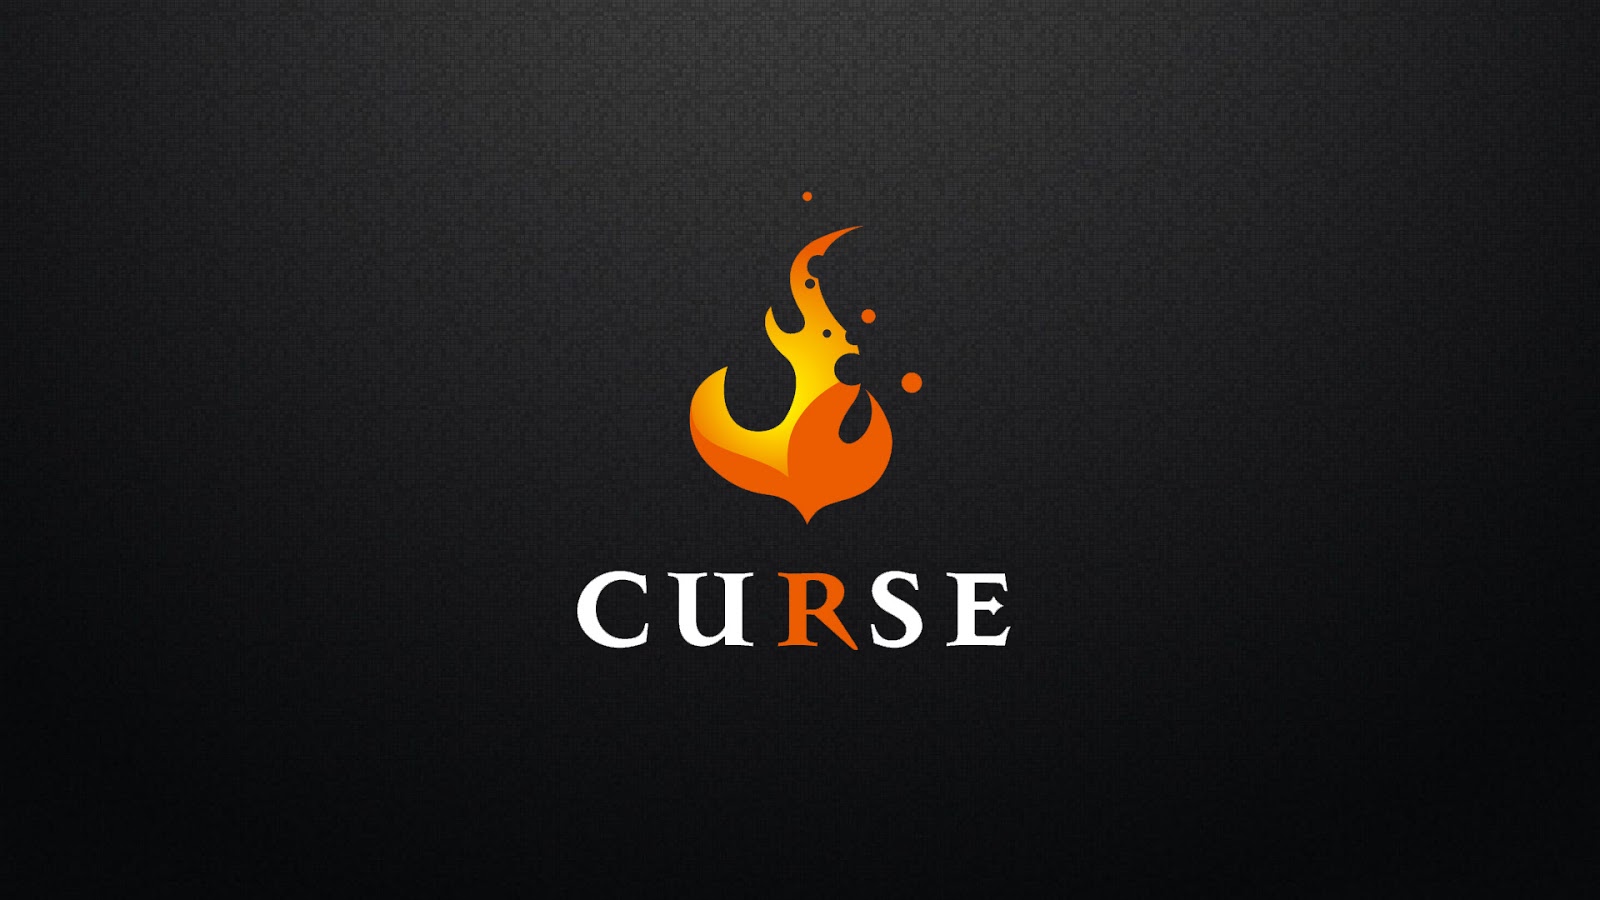 Amazing Curse Pictures & Backgrounds